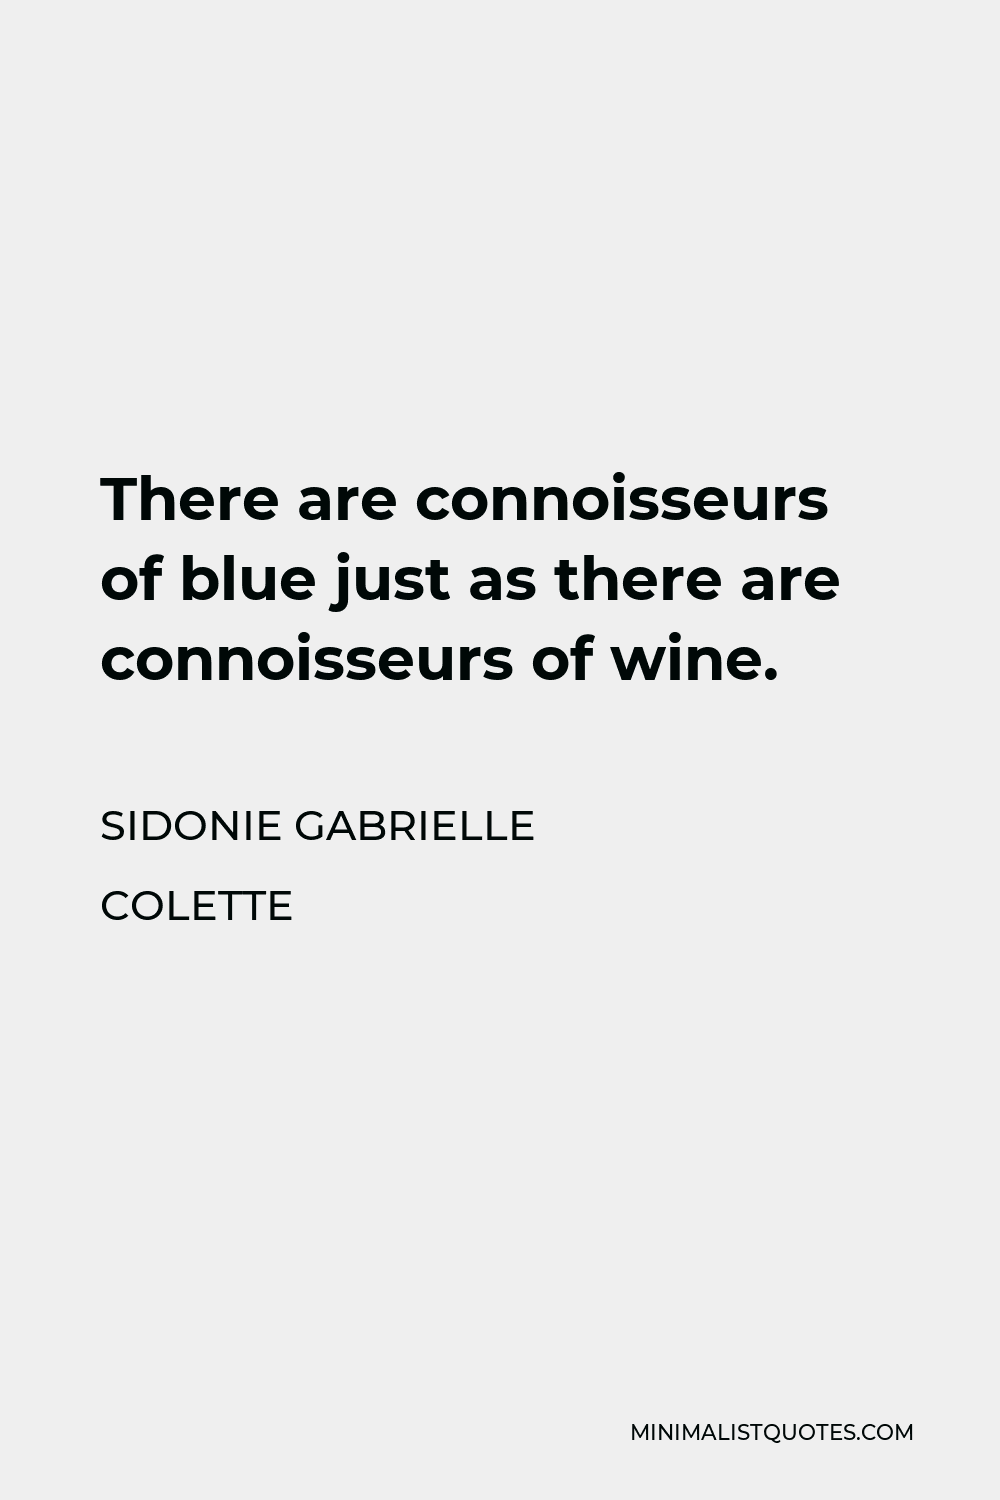 Sidonie Gabrielle Colette Quote - There are connoisseurs of blue just as there are connoisseurs of wine.